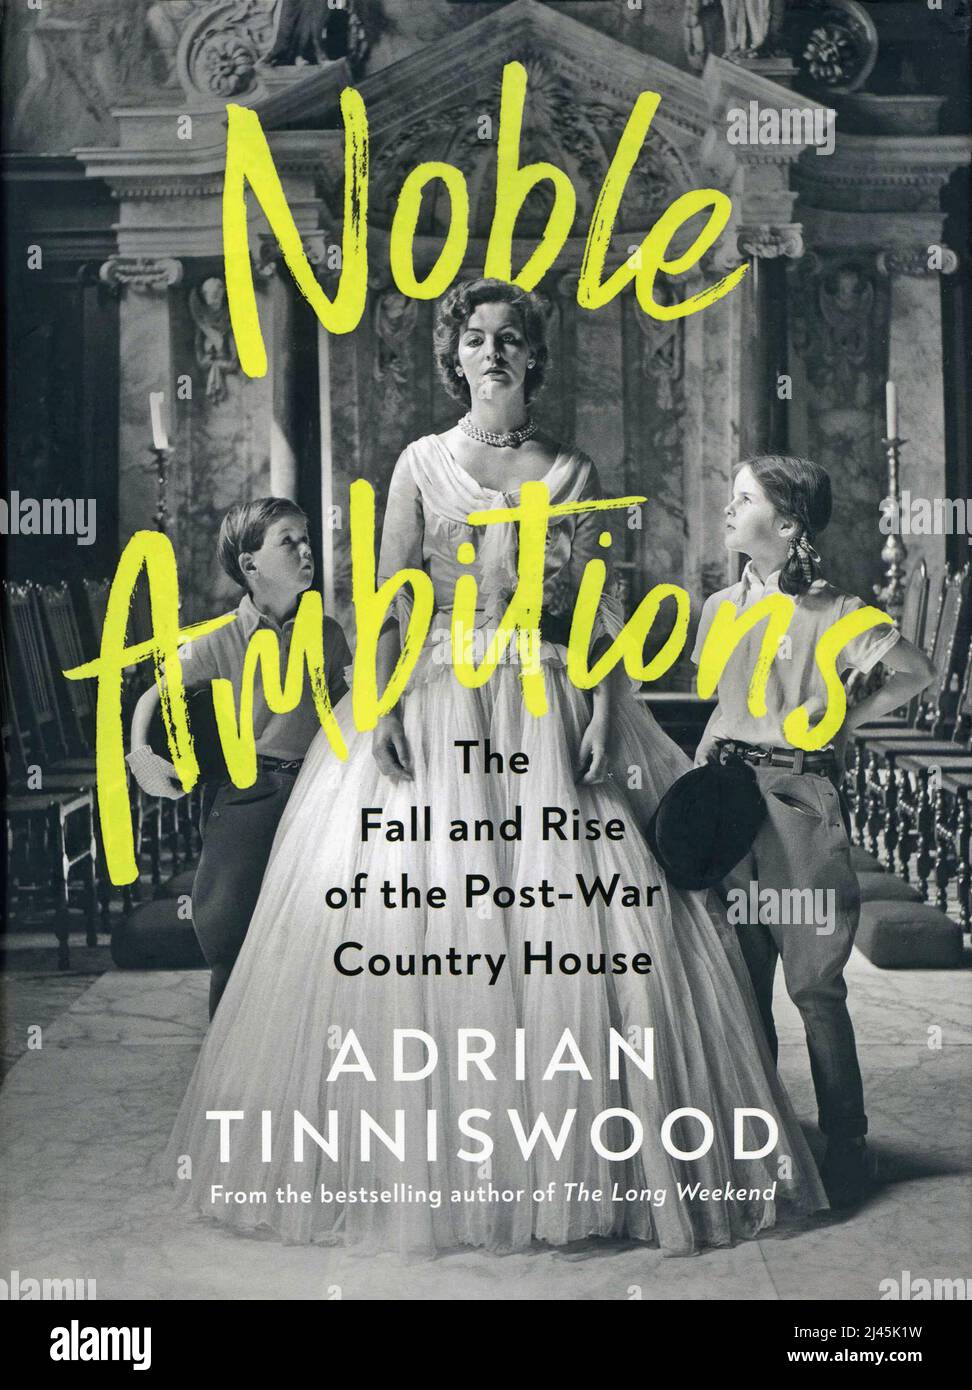 Copertina del libro 'Noble Ambitions, The Fall and Rise of the Post-War Country House' di Adrian Tinniswood. Foto Stock